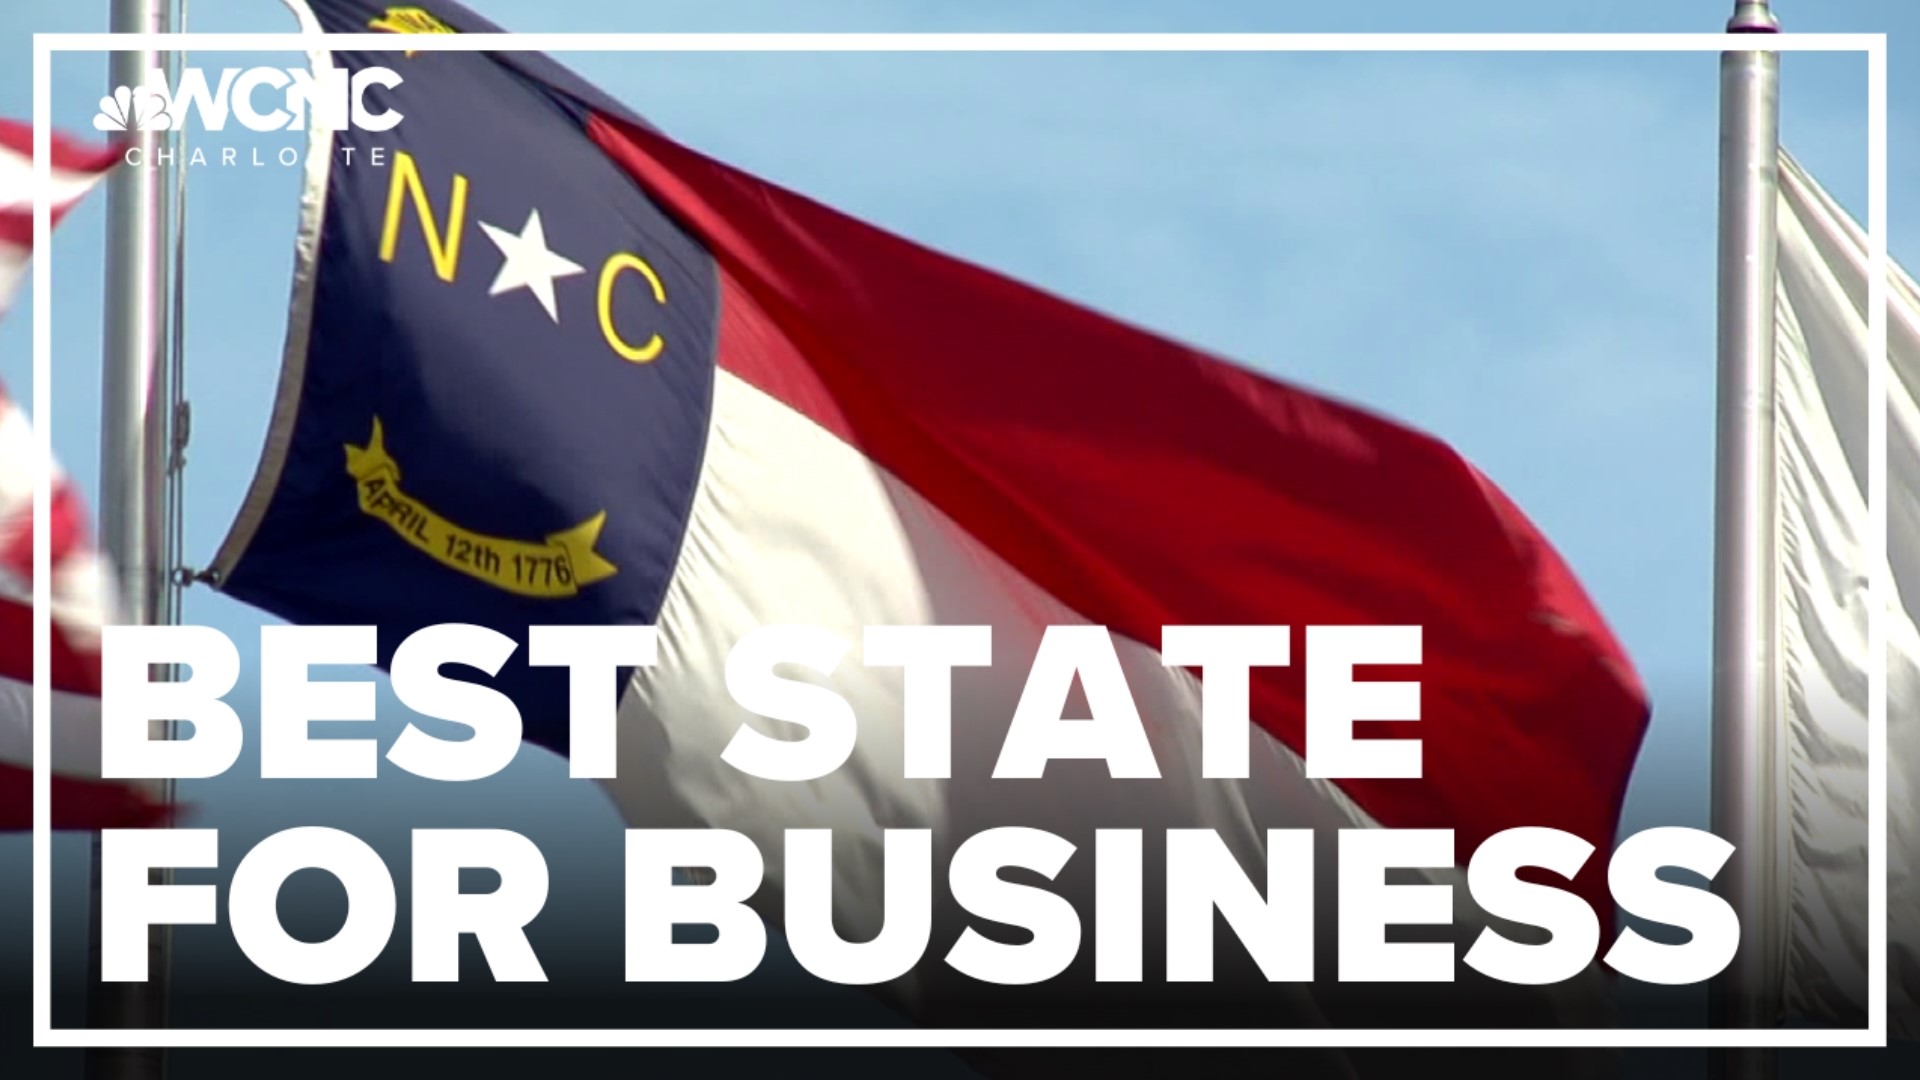 North Carolina named CNBC's best state for business in 2023